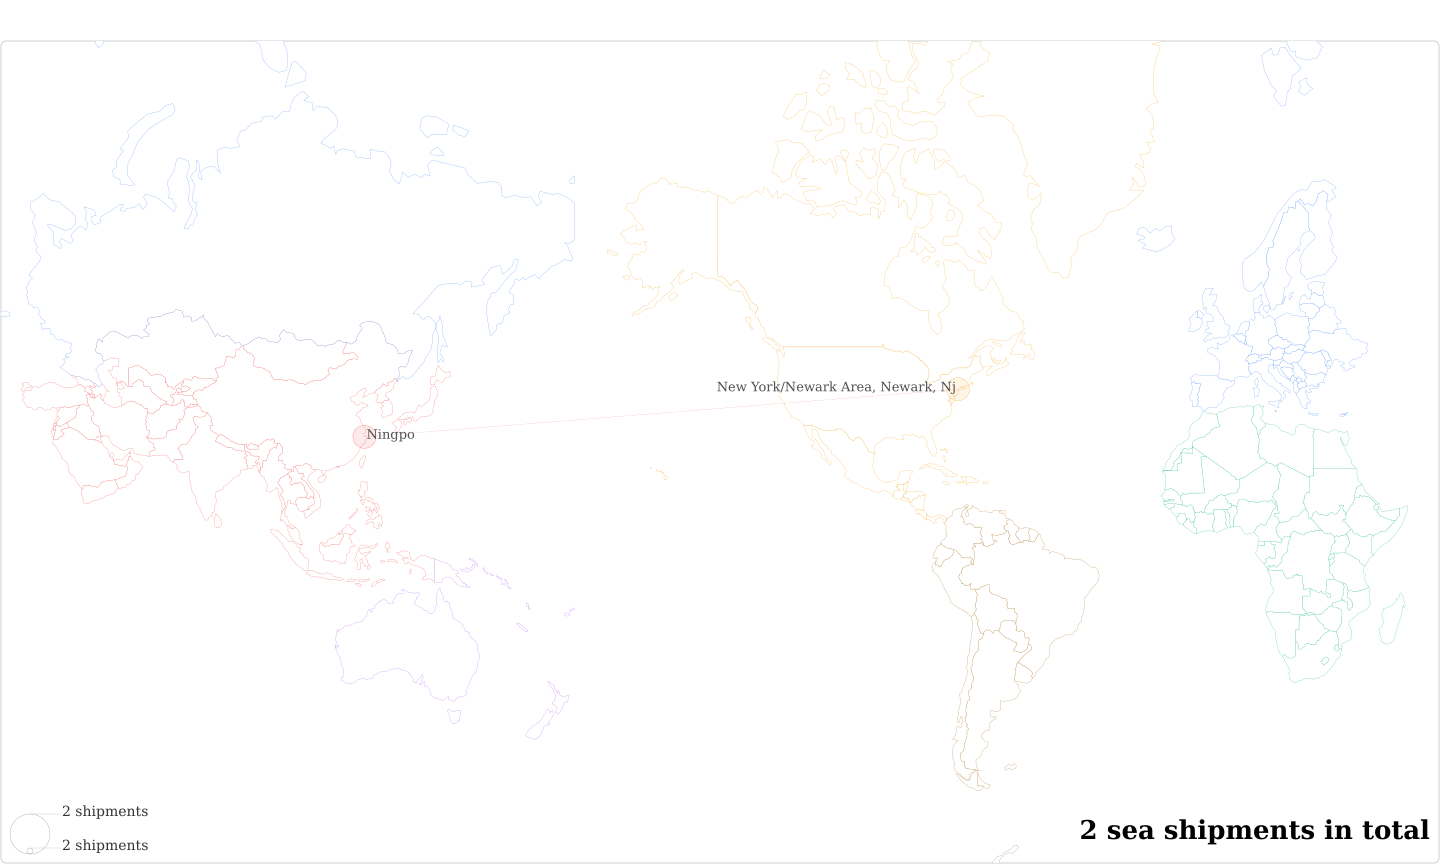 Funcation Station's Imports Per Country Map